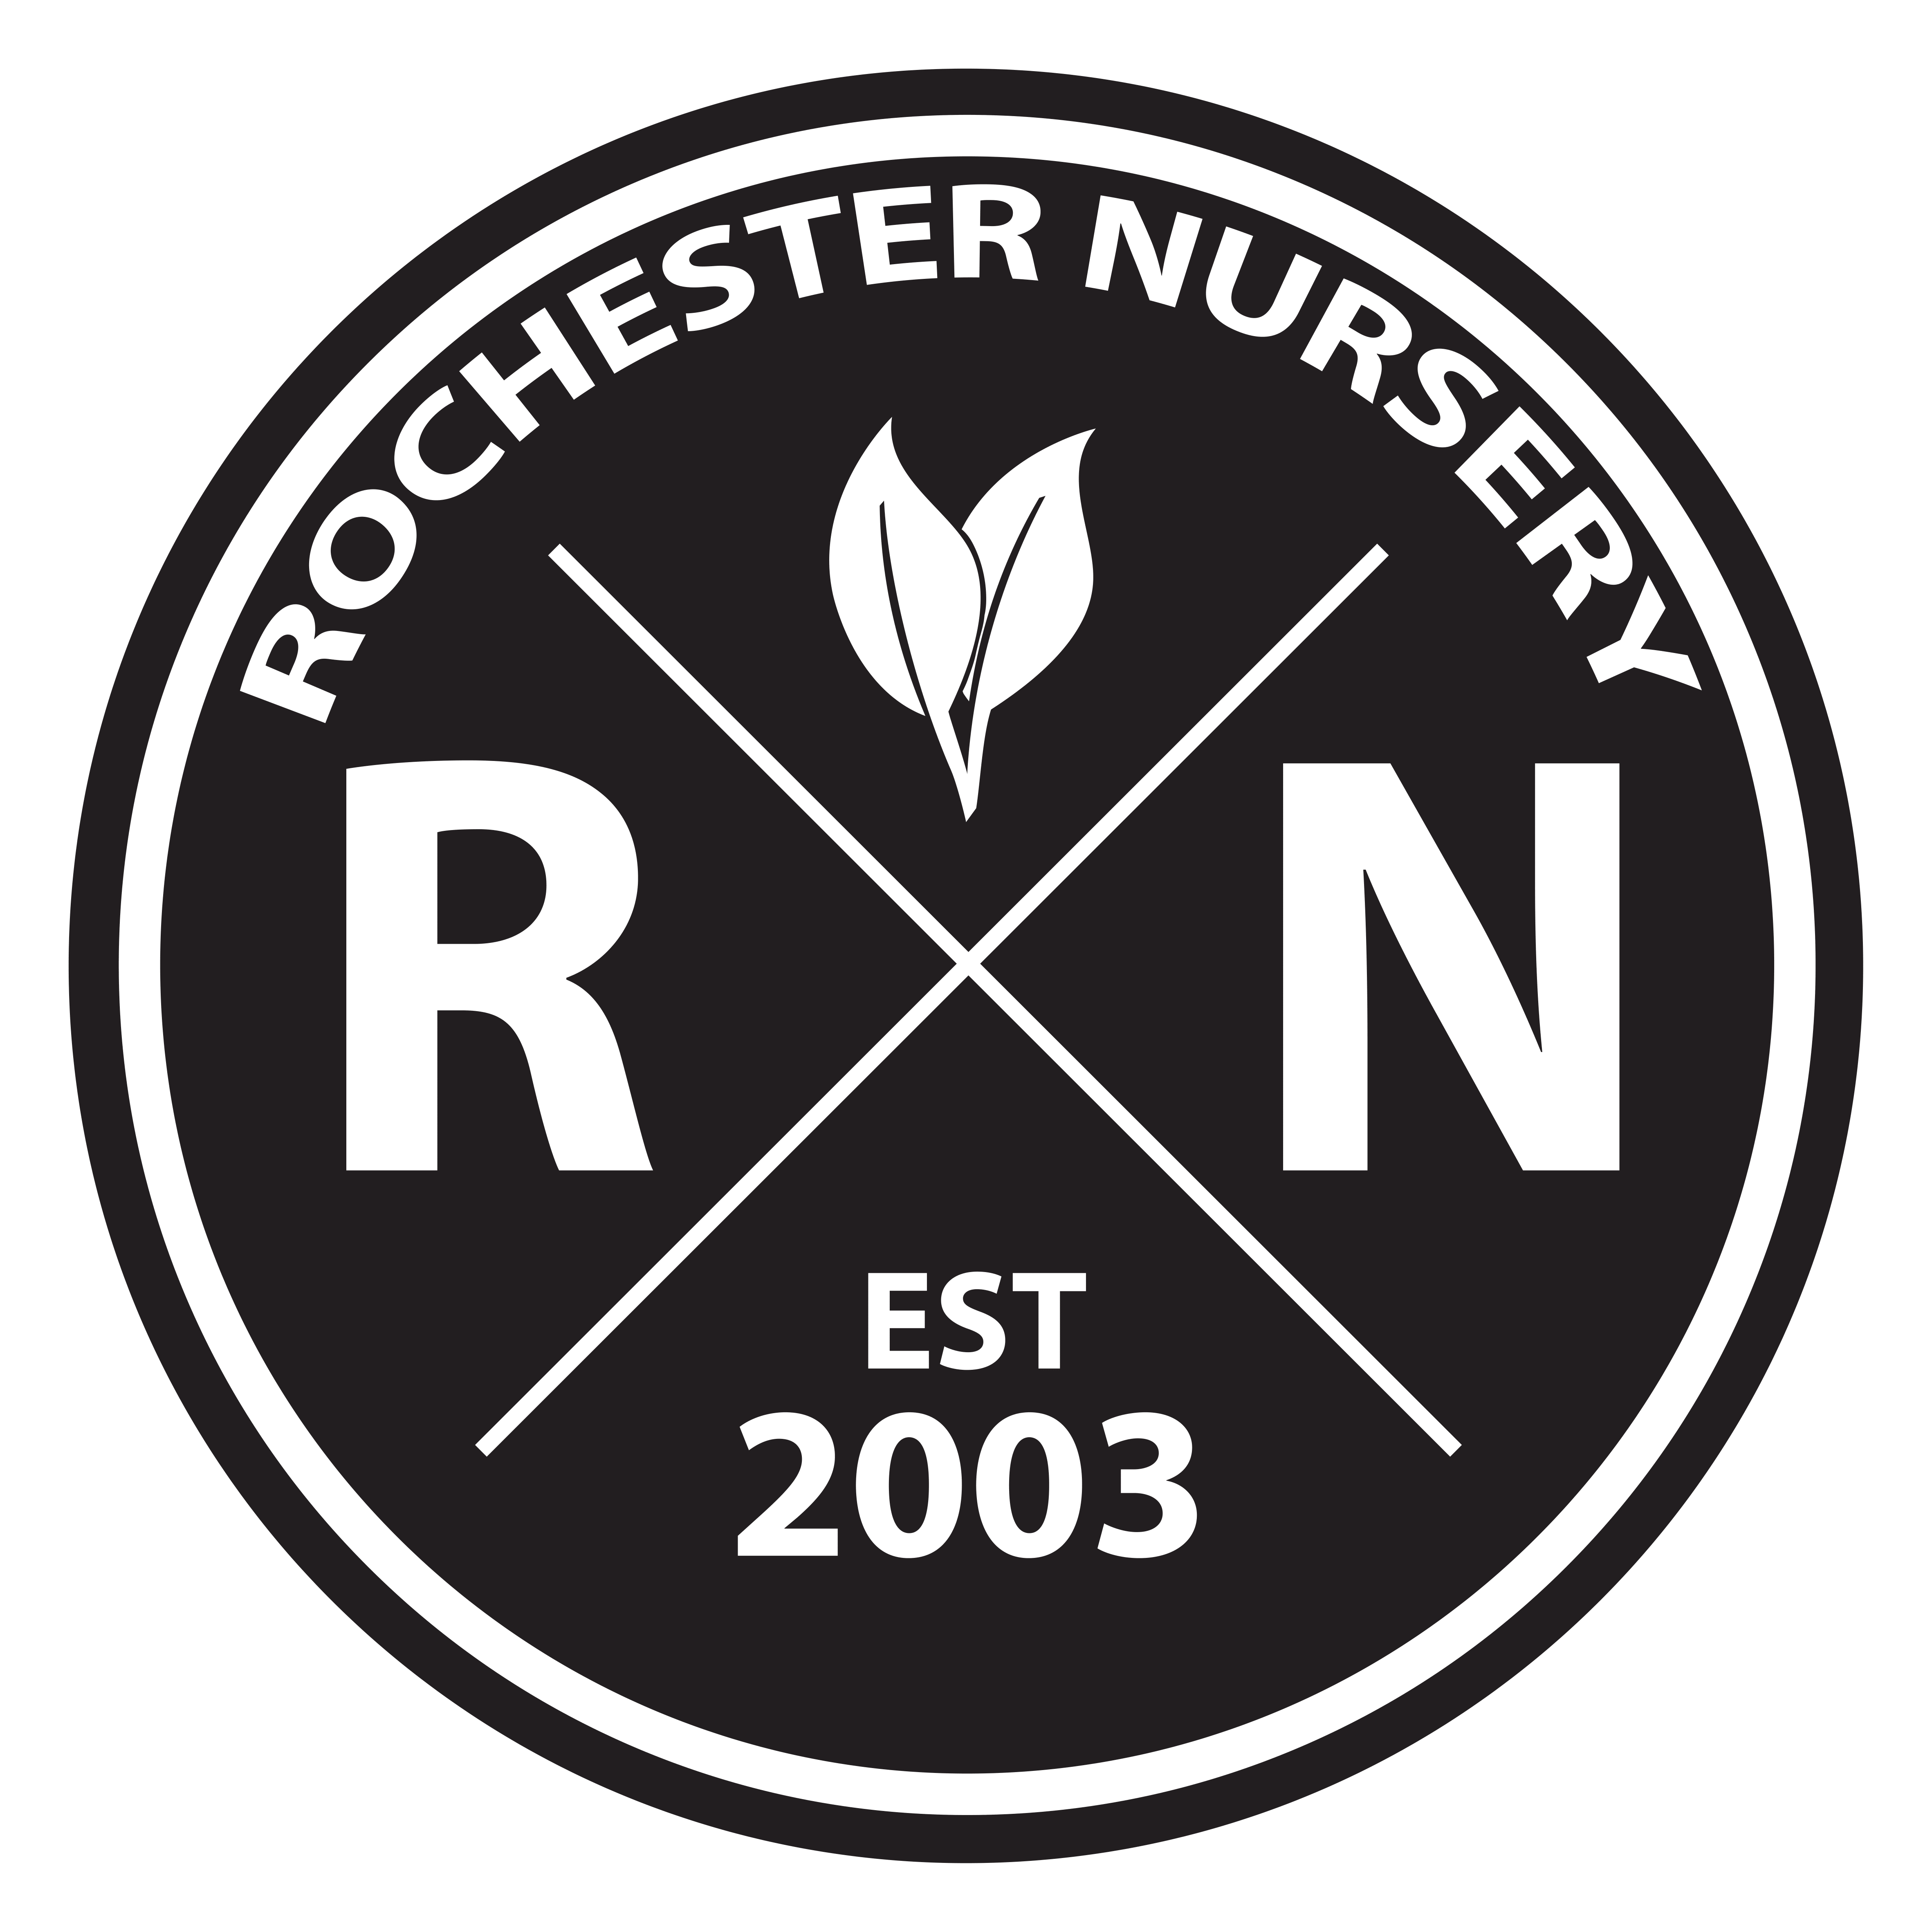 Home | Rochester Nursery | Retail & Wholesale Native and Exotics